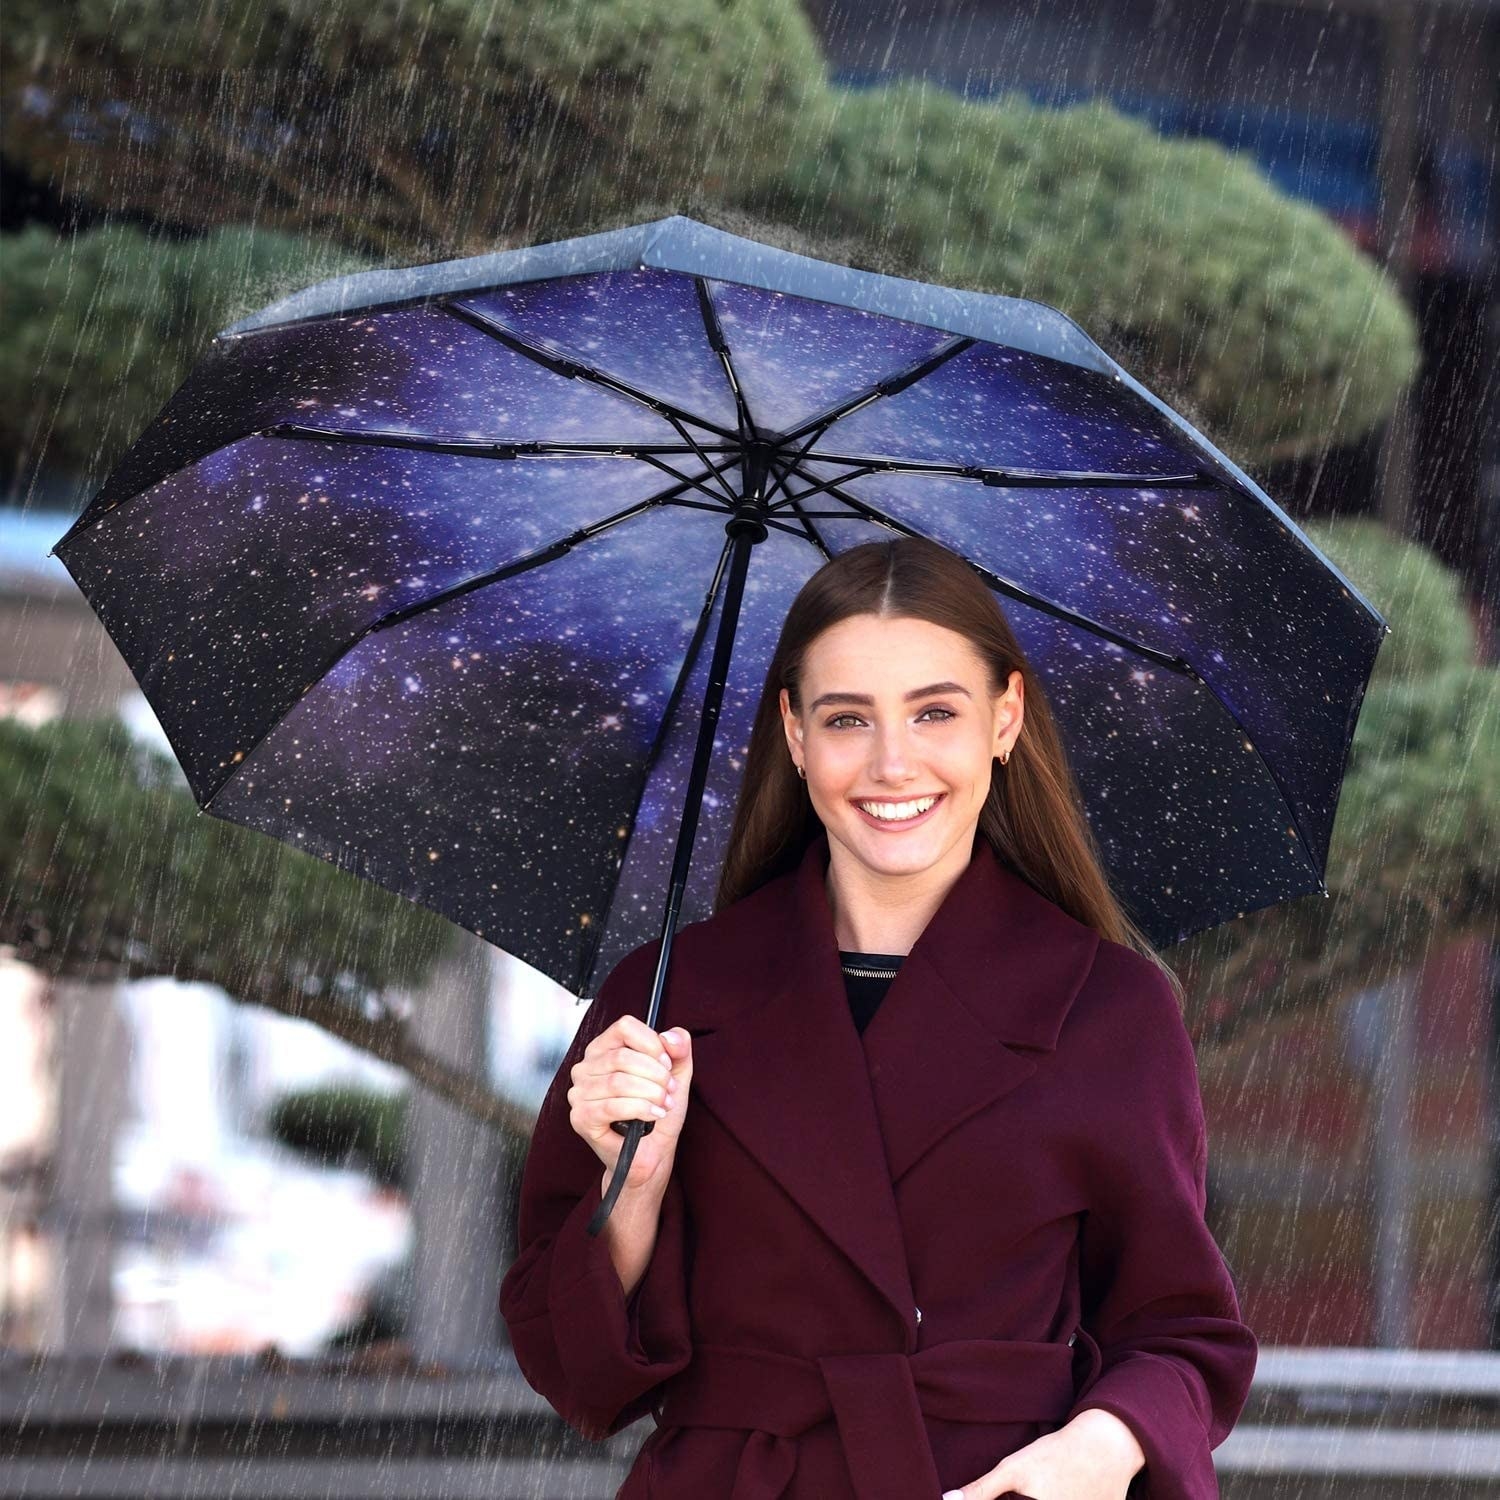 A smiling person holding an umbrella in the rain